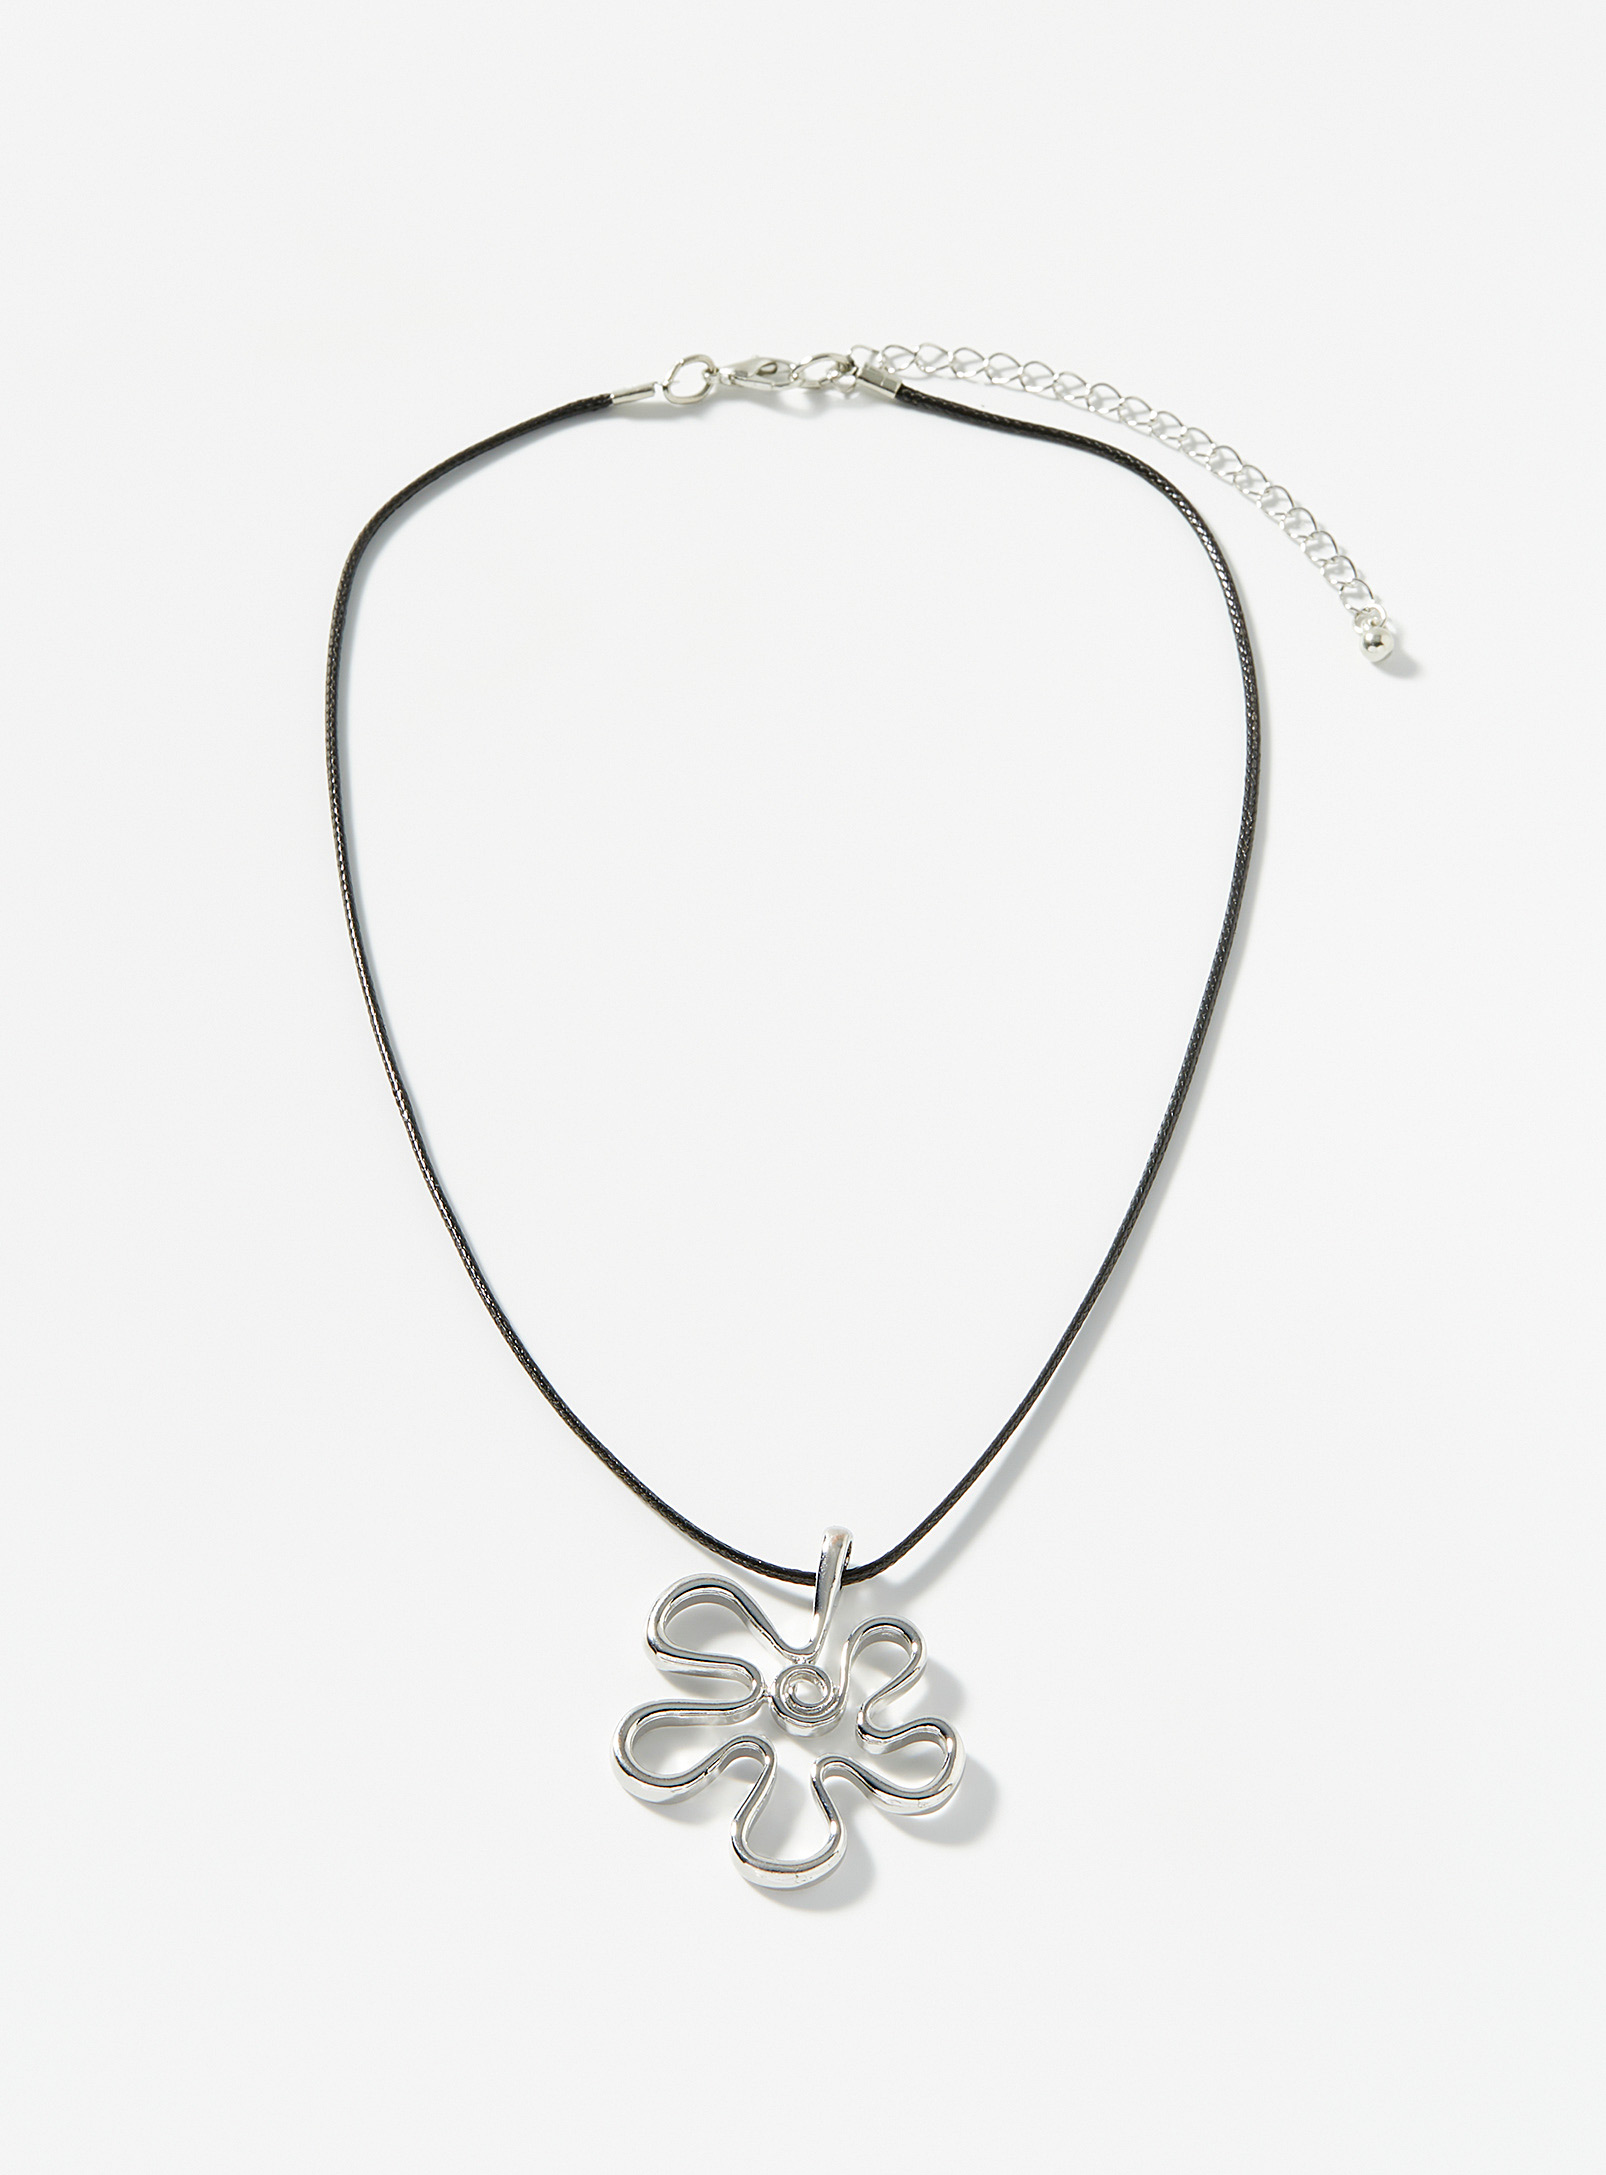 Simons - Women's Abstract metallic flower cord necklace